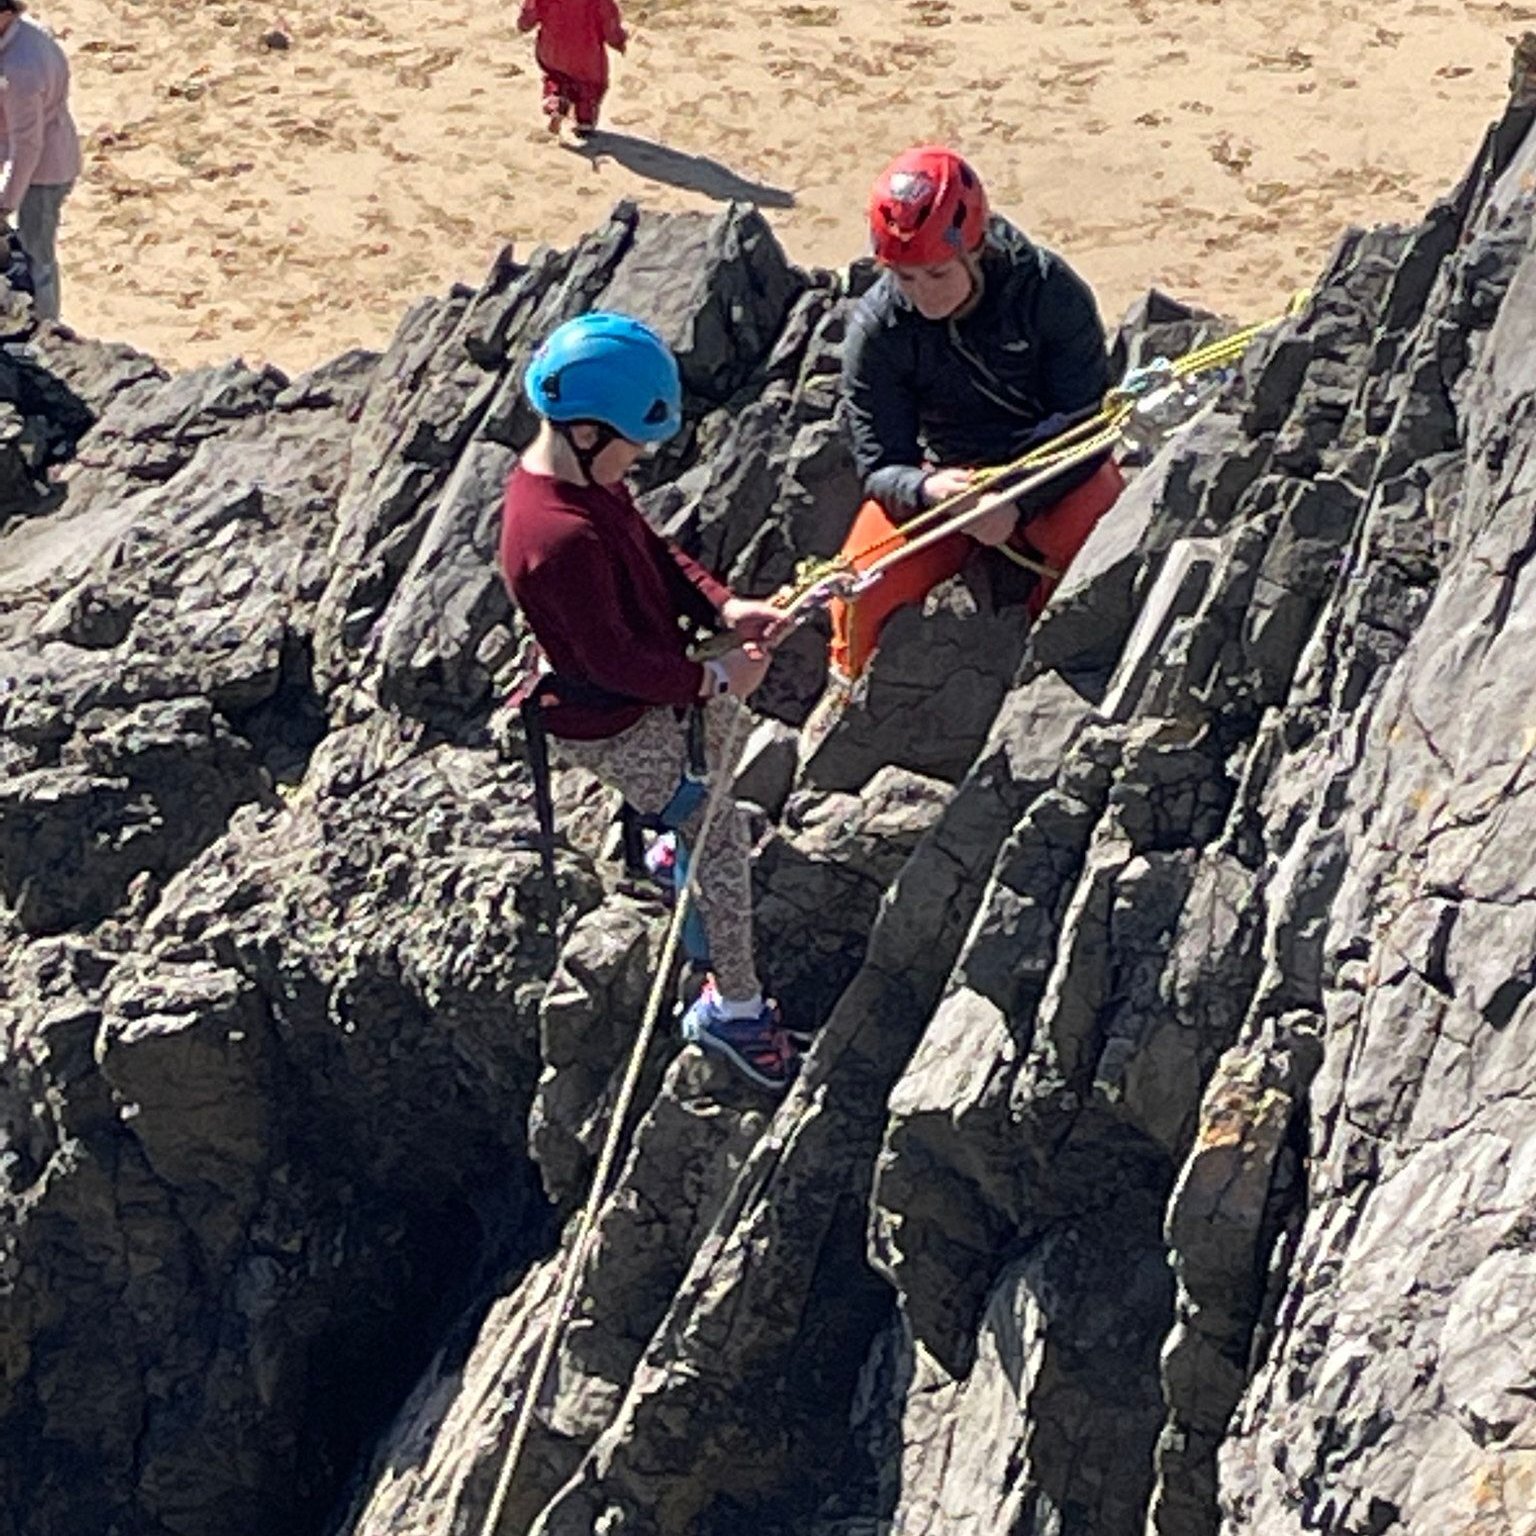 Great to see some of our climbing club attendees at our outdoor events last week. Keep your eyes open for more outdoor adventures coming soon 🧗😀 #Community #findyourhappy #climbing #notforprofit #nofear #familyfun #abseiling #outdoor #adventures #n